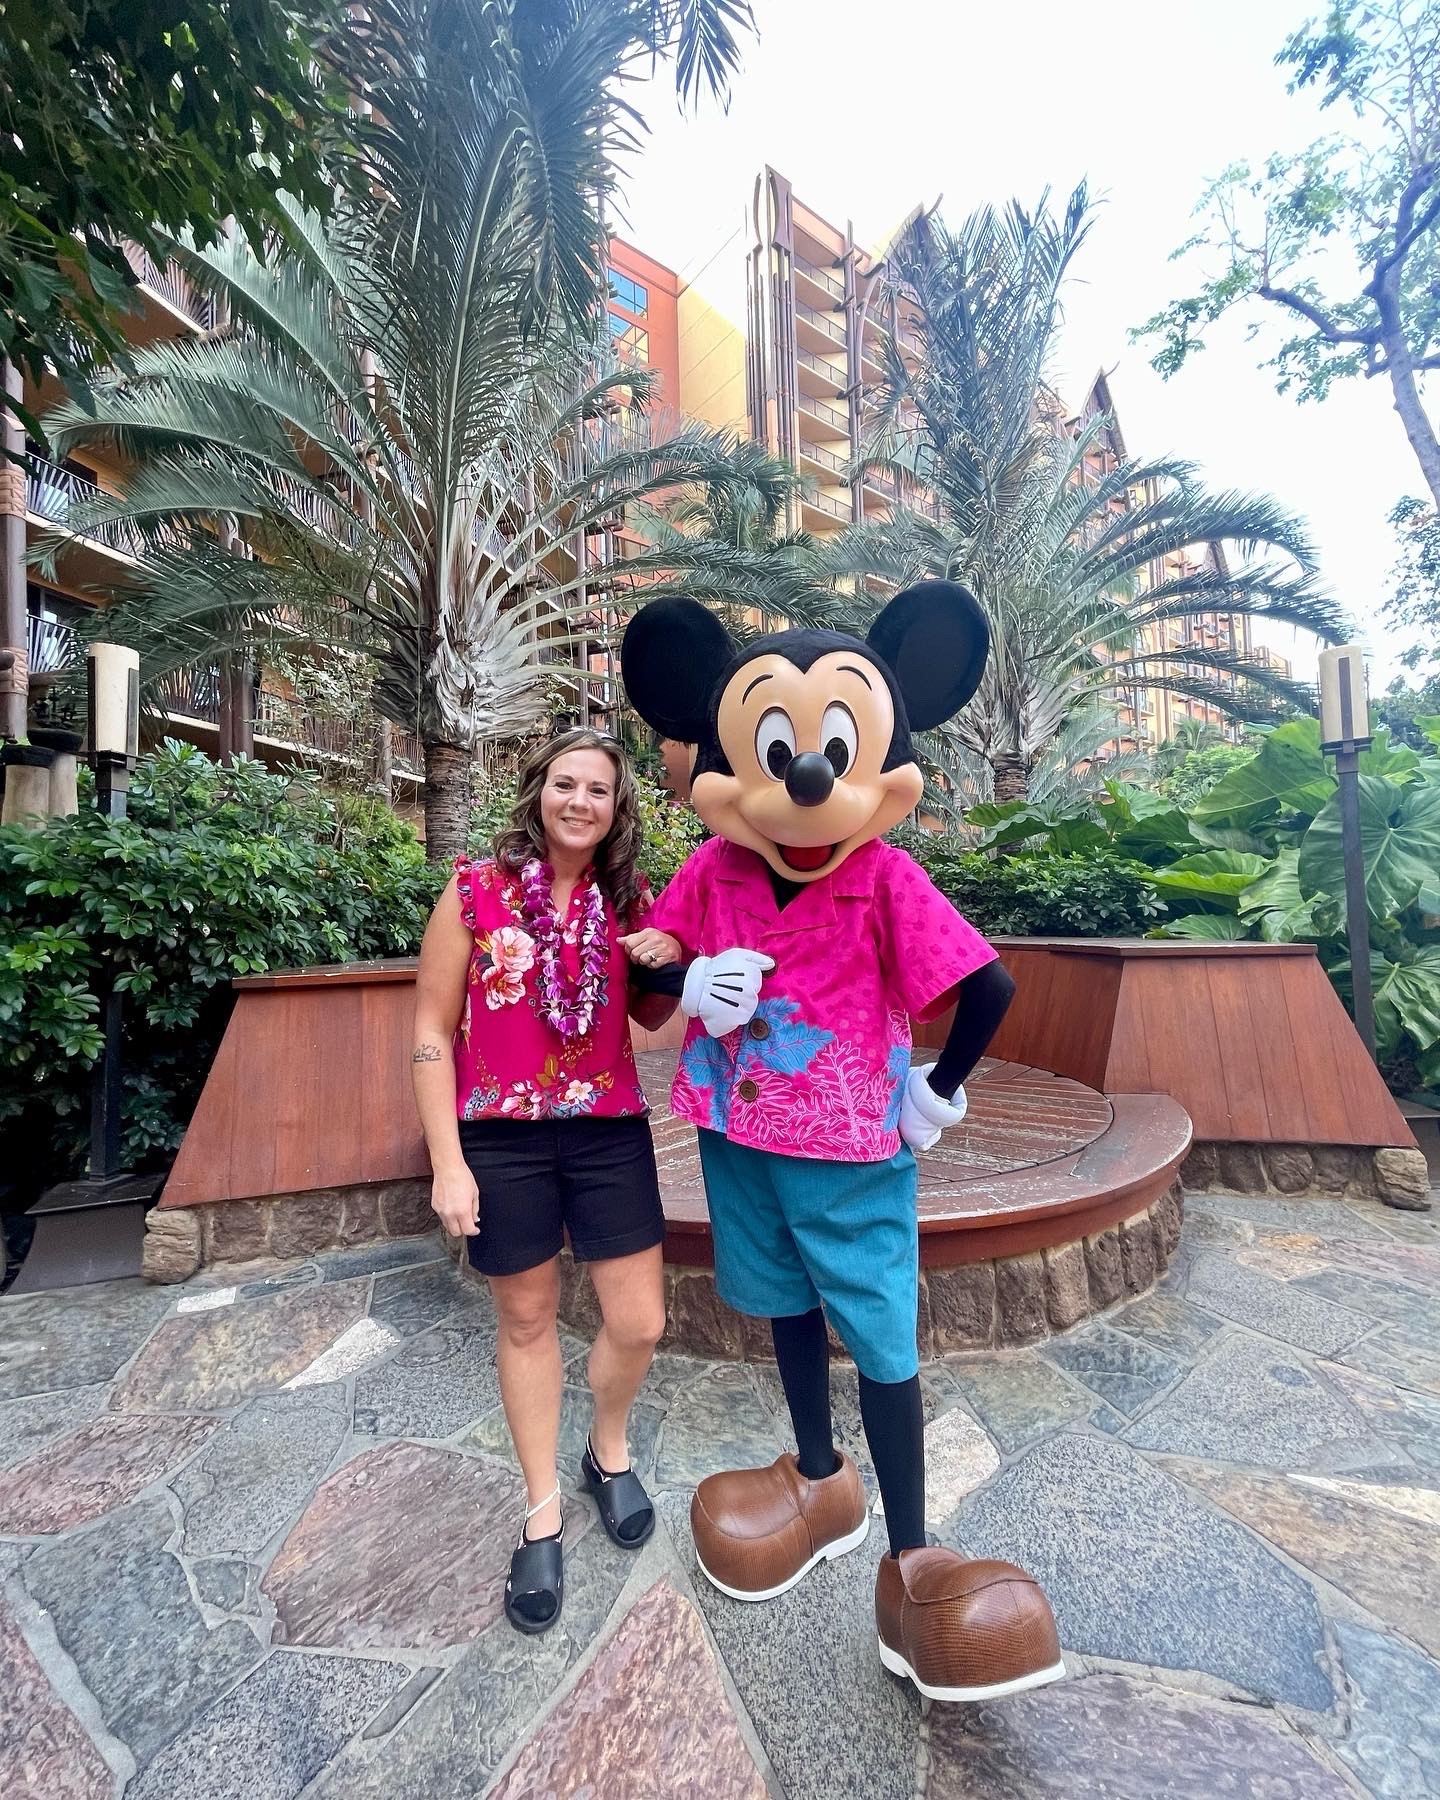 : A woman in Hawaiian attire poses for a picture outside of a resort while linking hands with someone in a Mickey Mouse costume that includes a Hawaiian shirt.